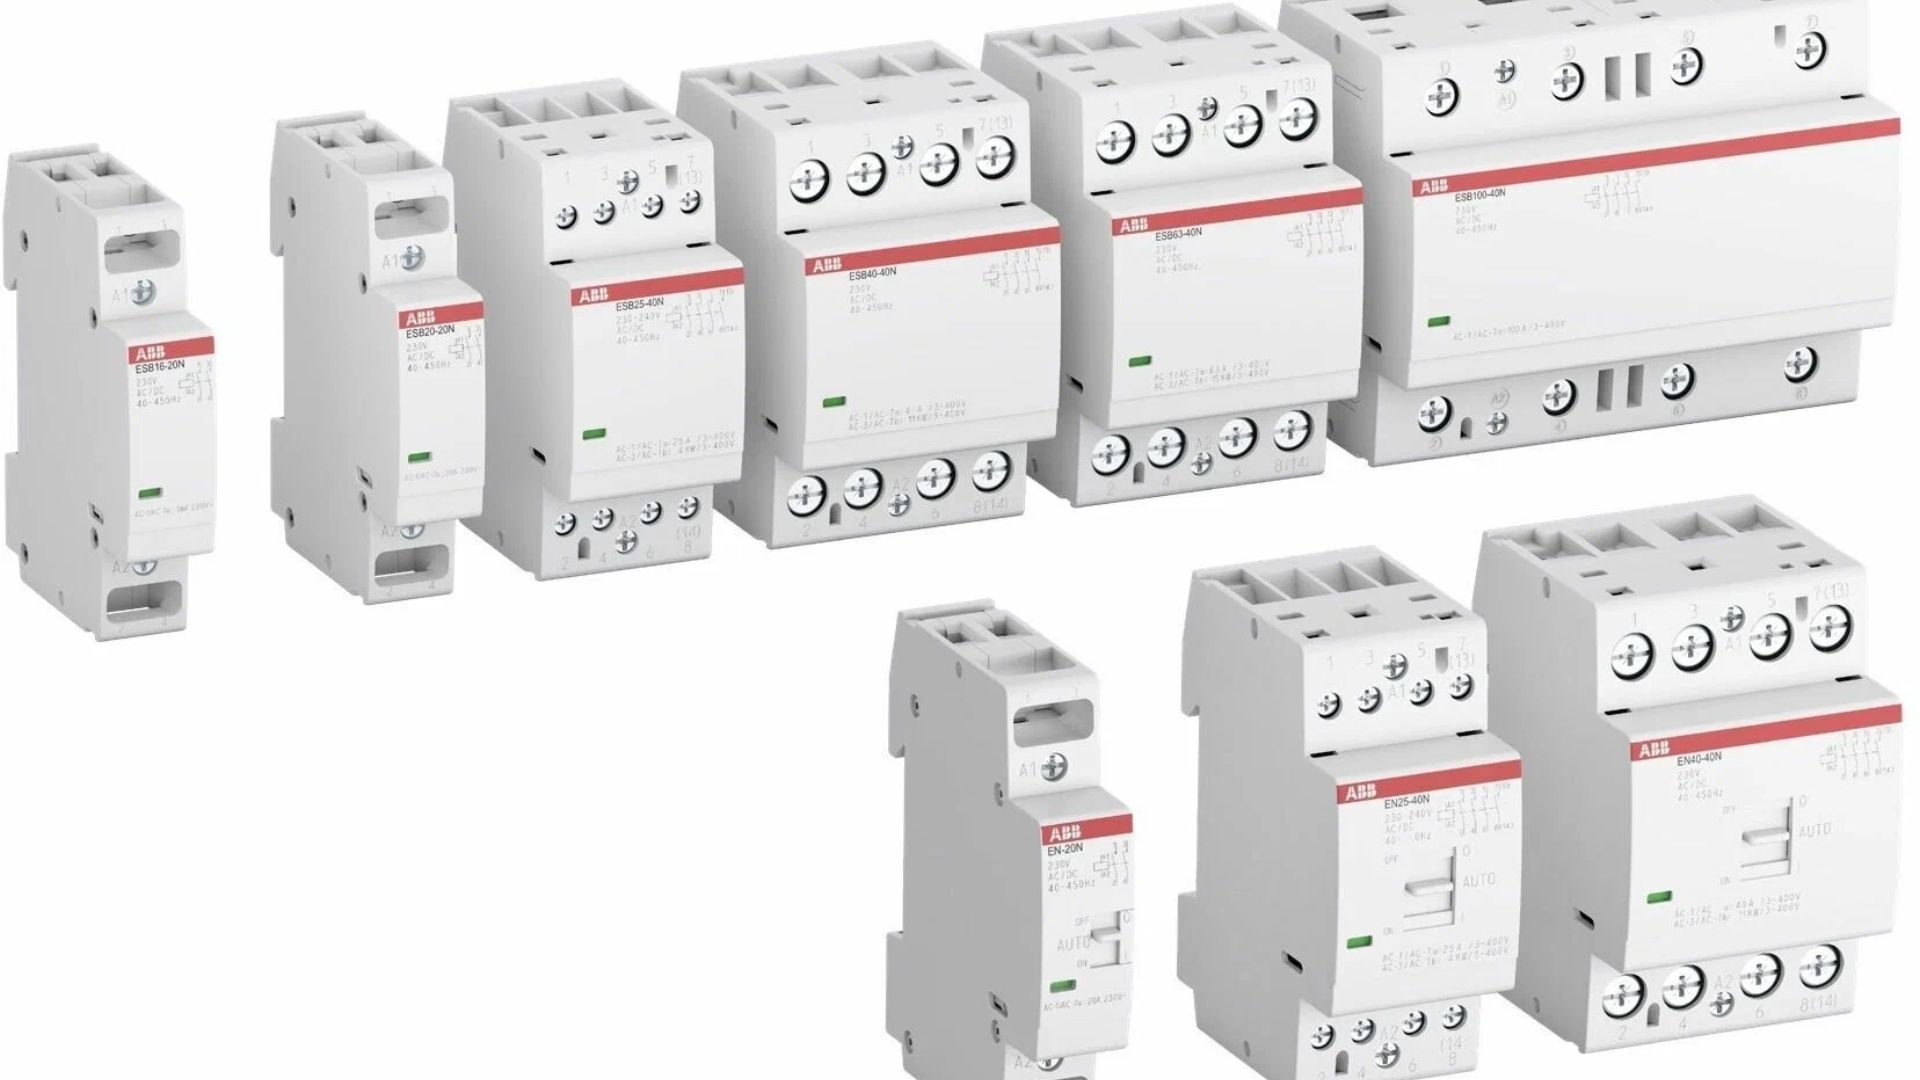 Why Top Еnginееrs Choosе ABB Elеctric Products